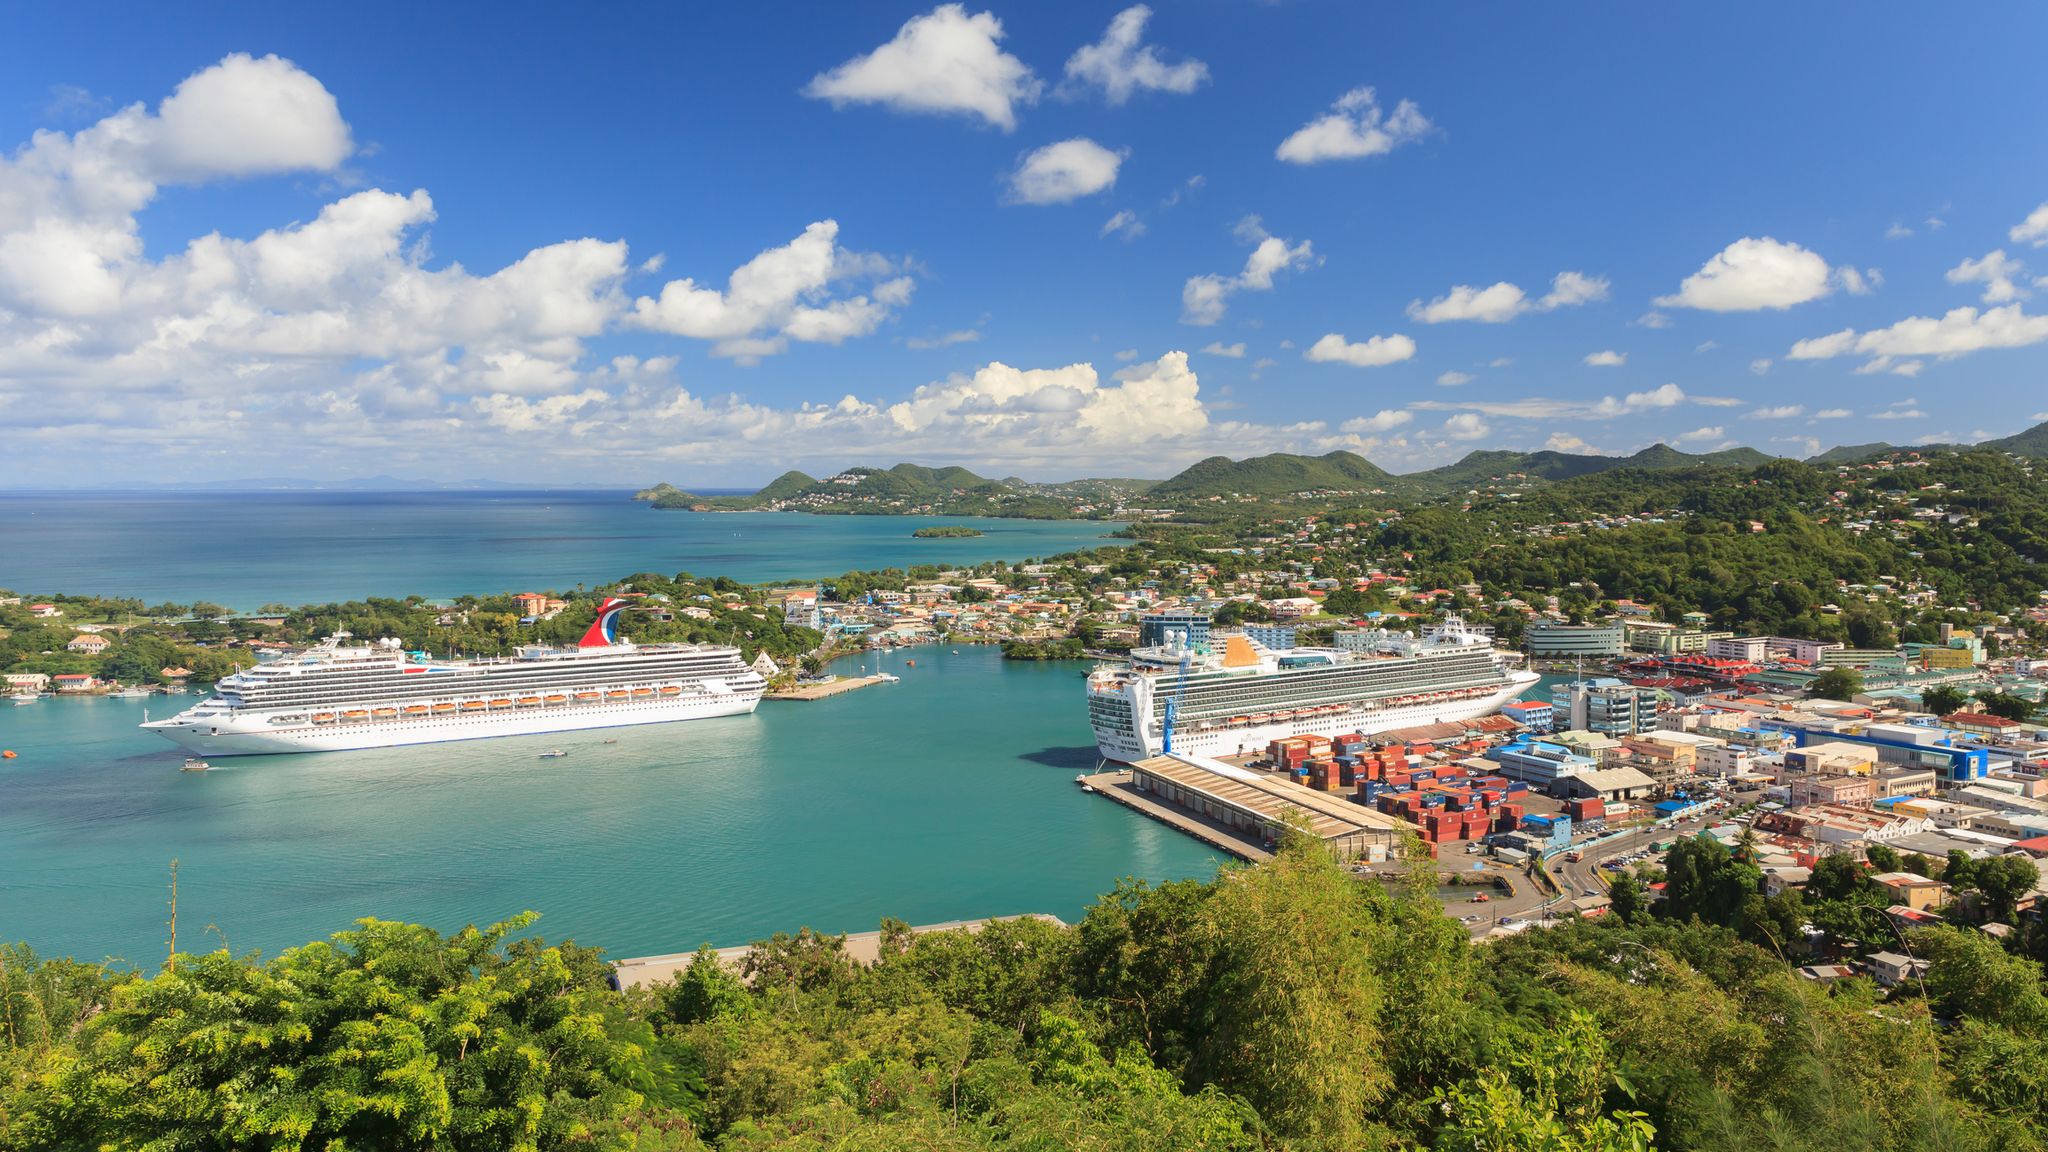 St Lucia: 300 cruise passengers quarantined on ship after measles case